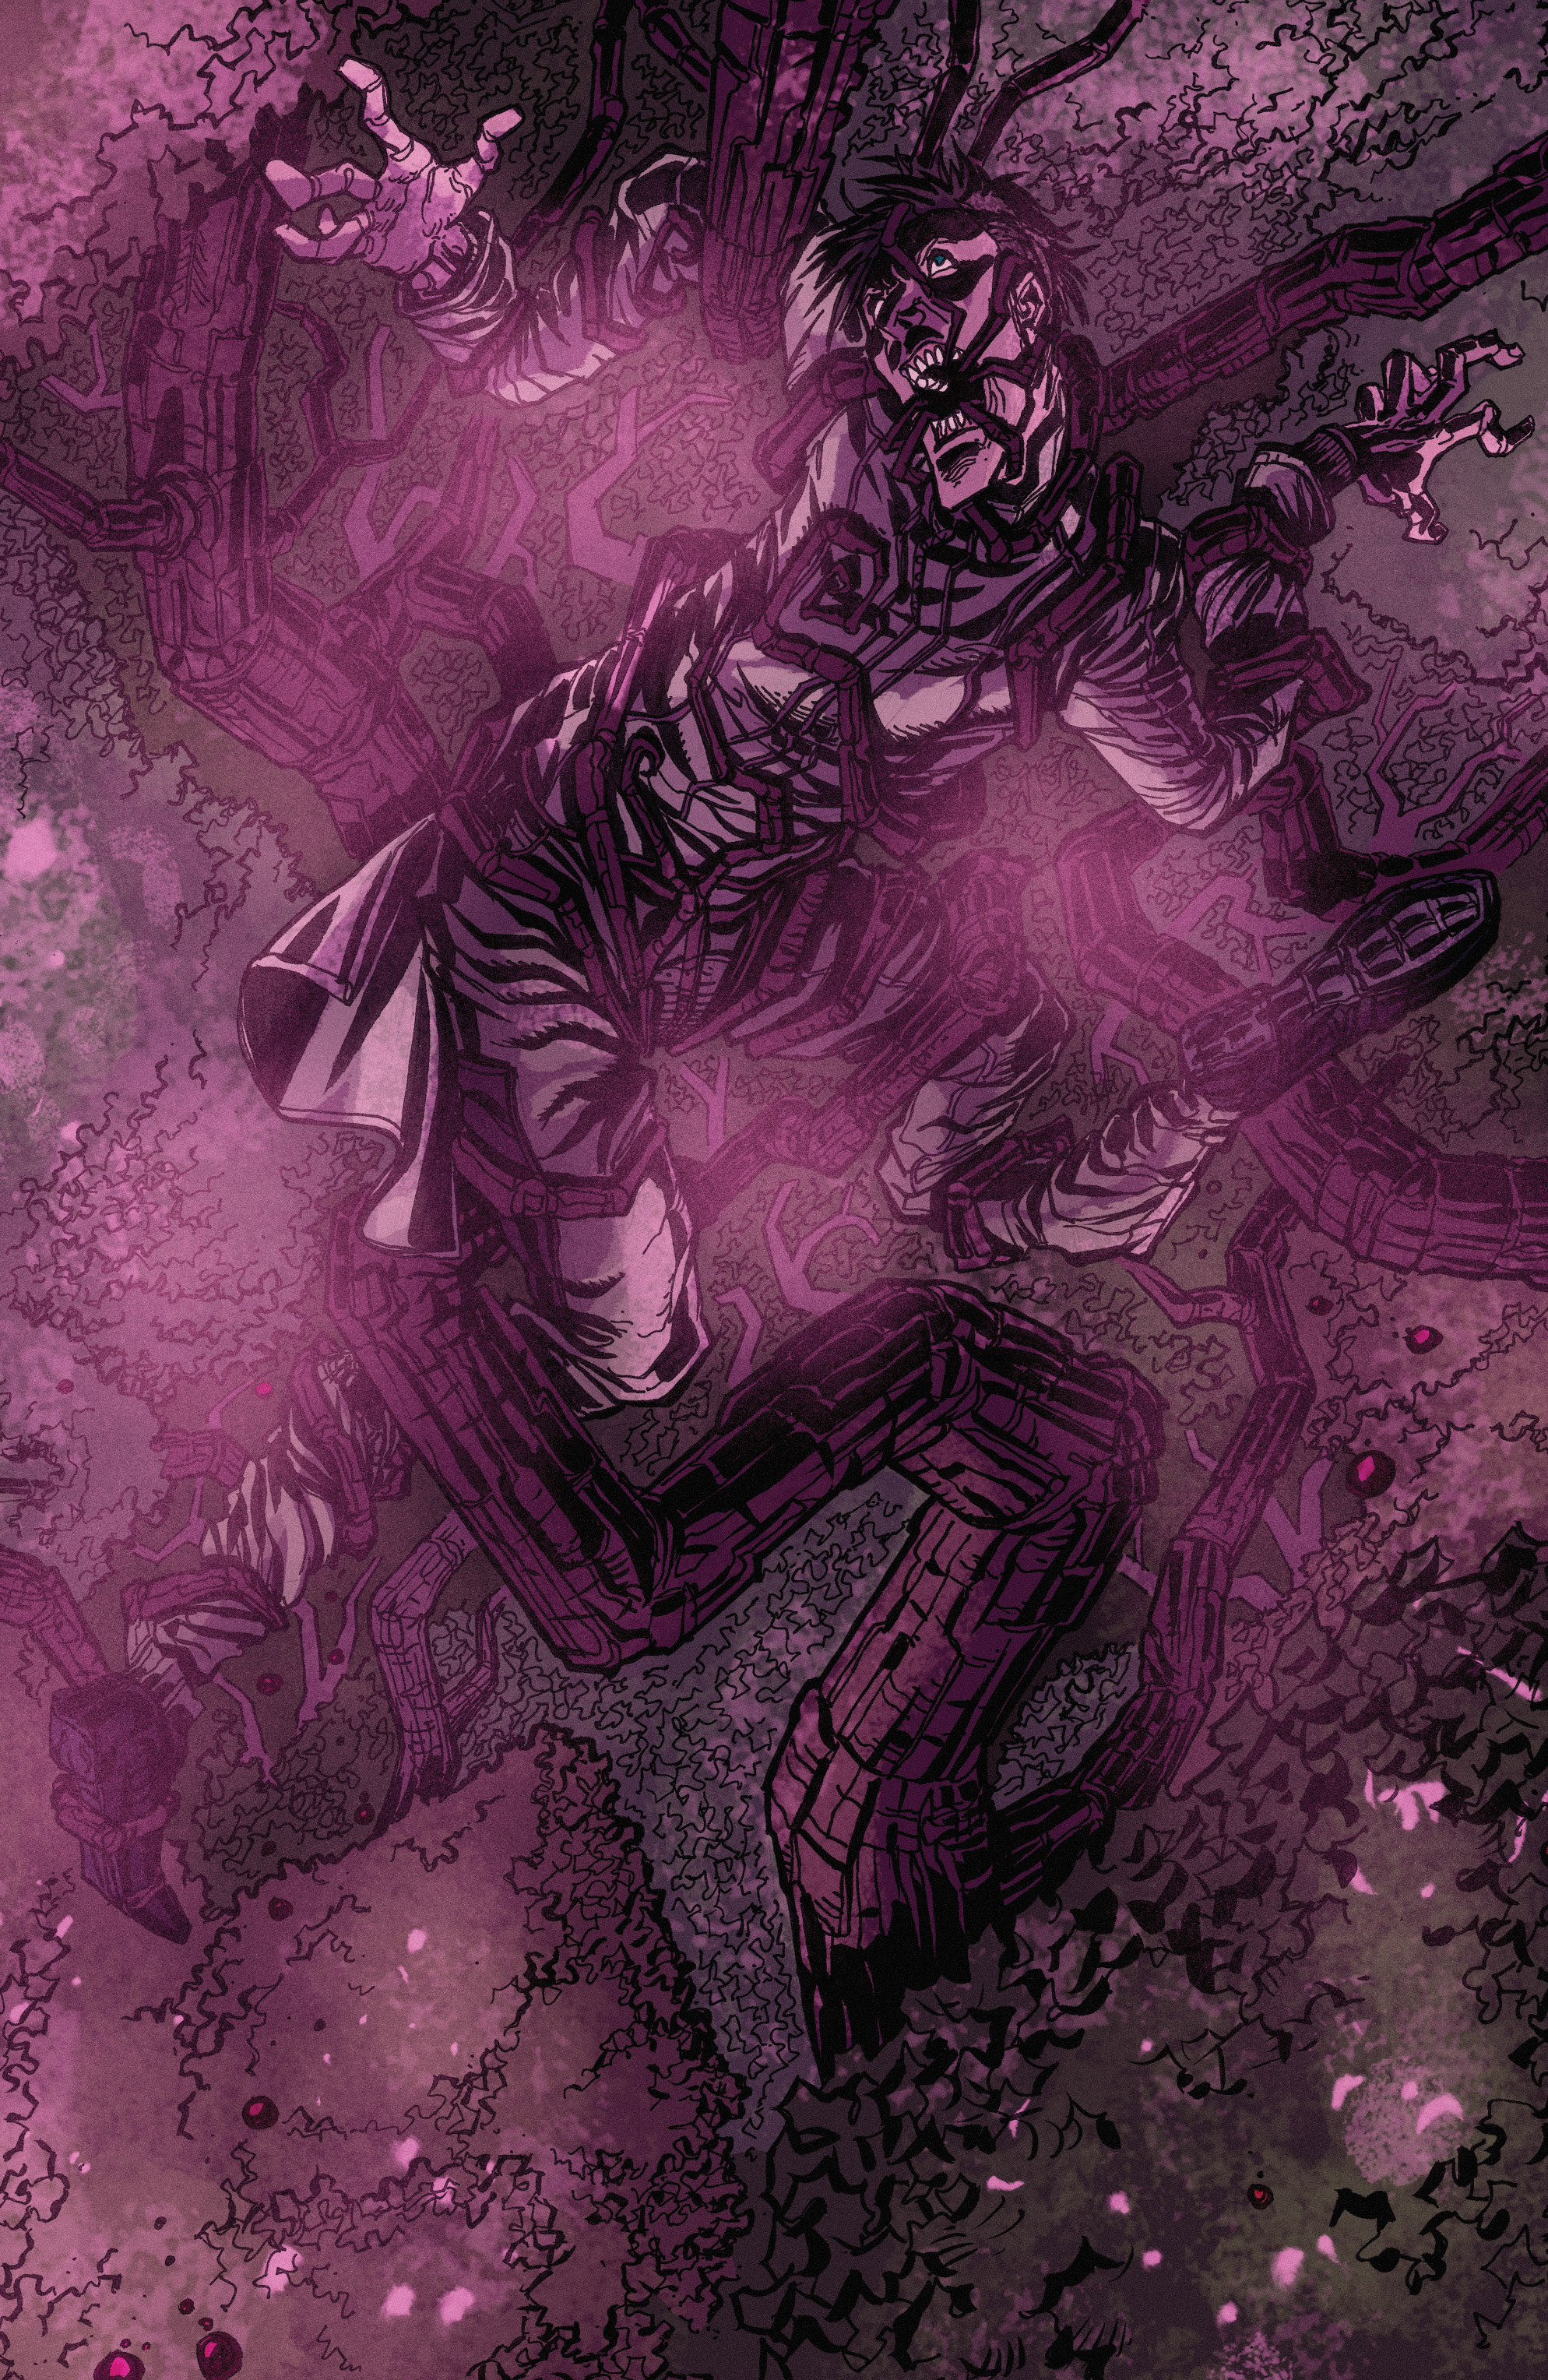 Read online Roche Limit: Clandestiny comic -  Issue #3 - 14